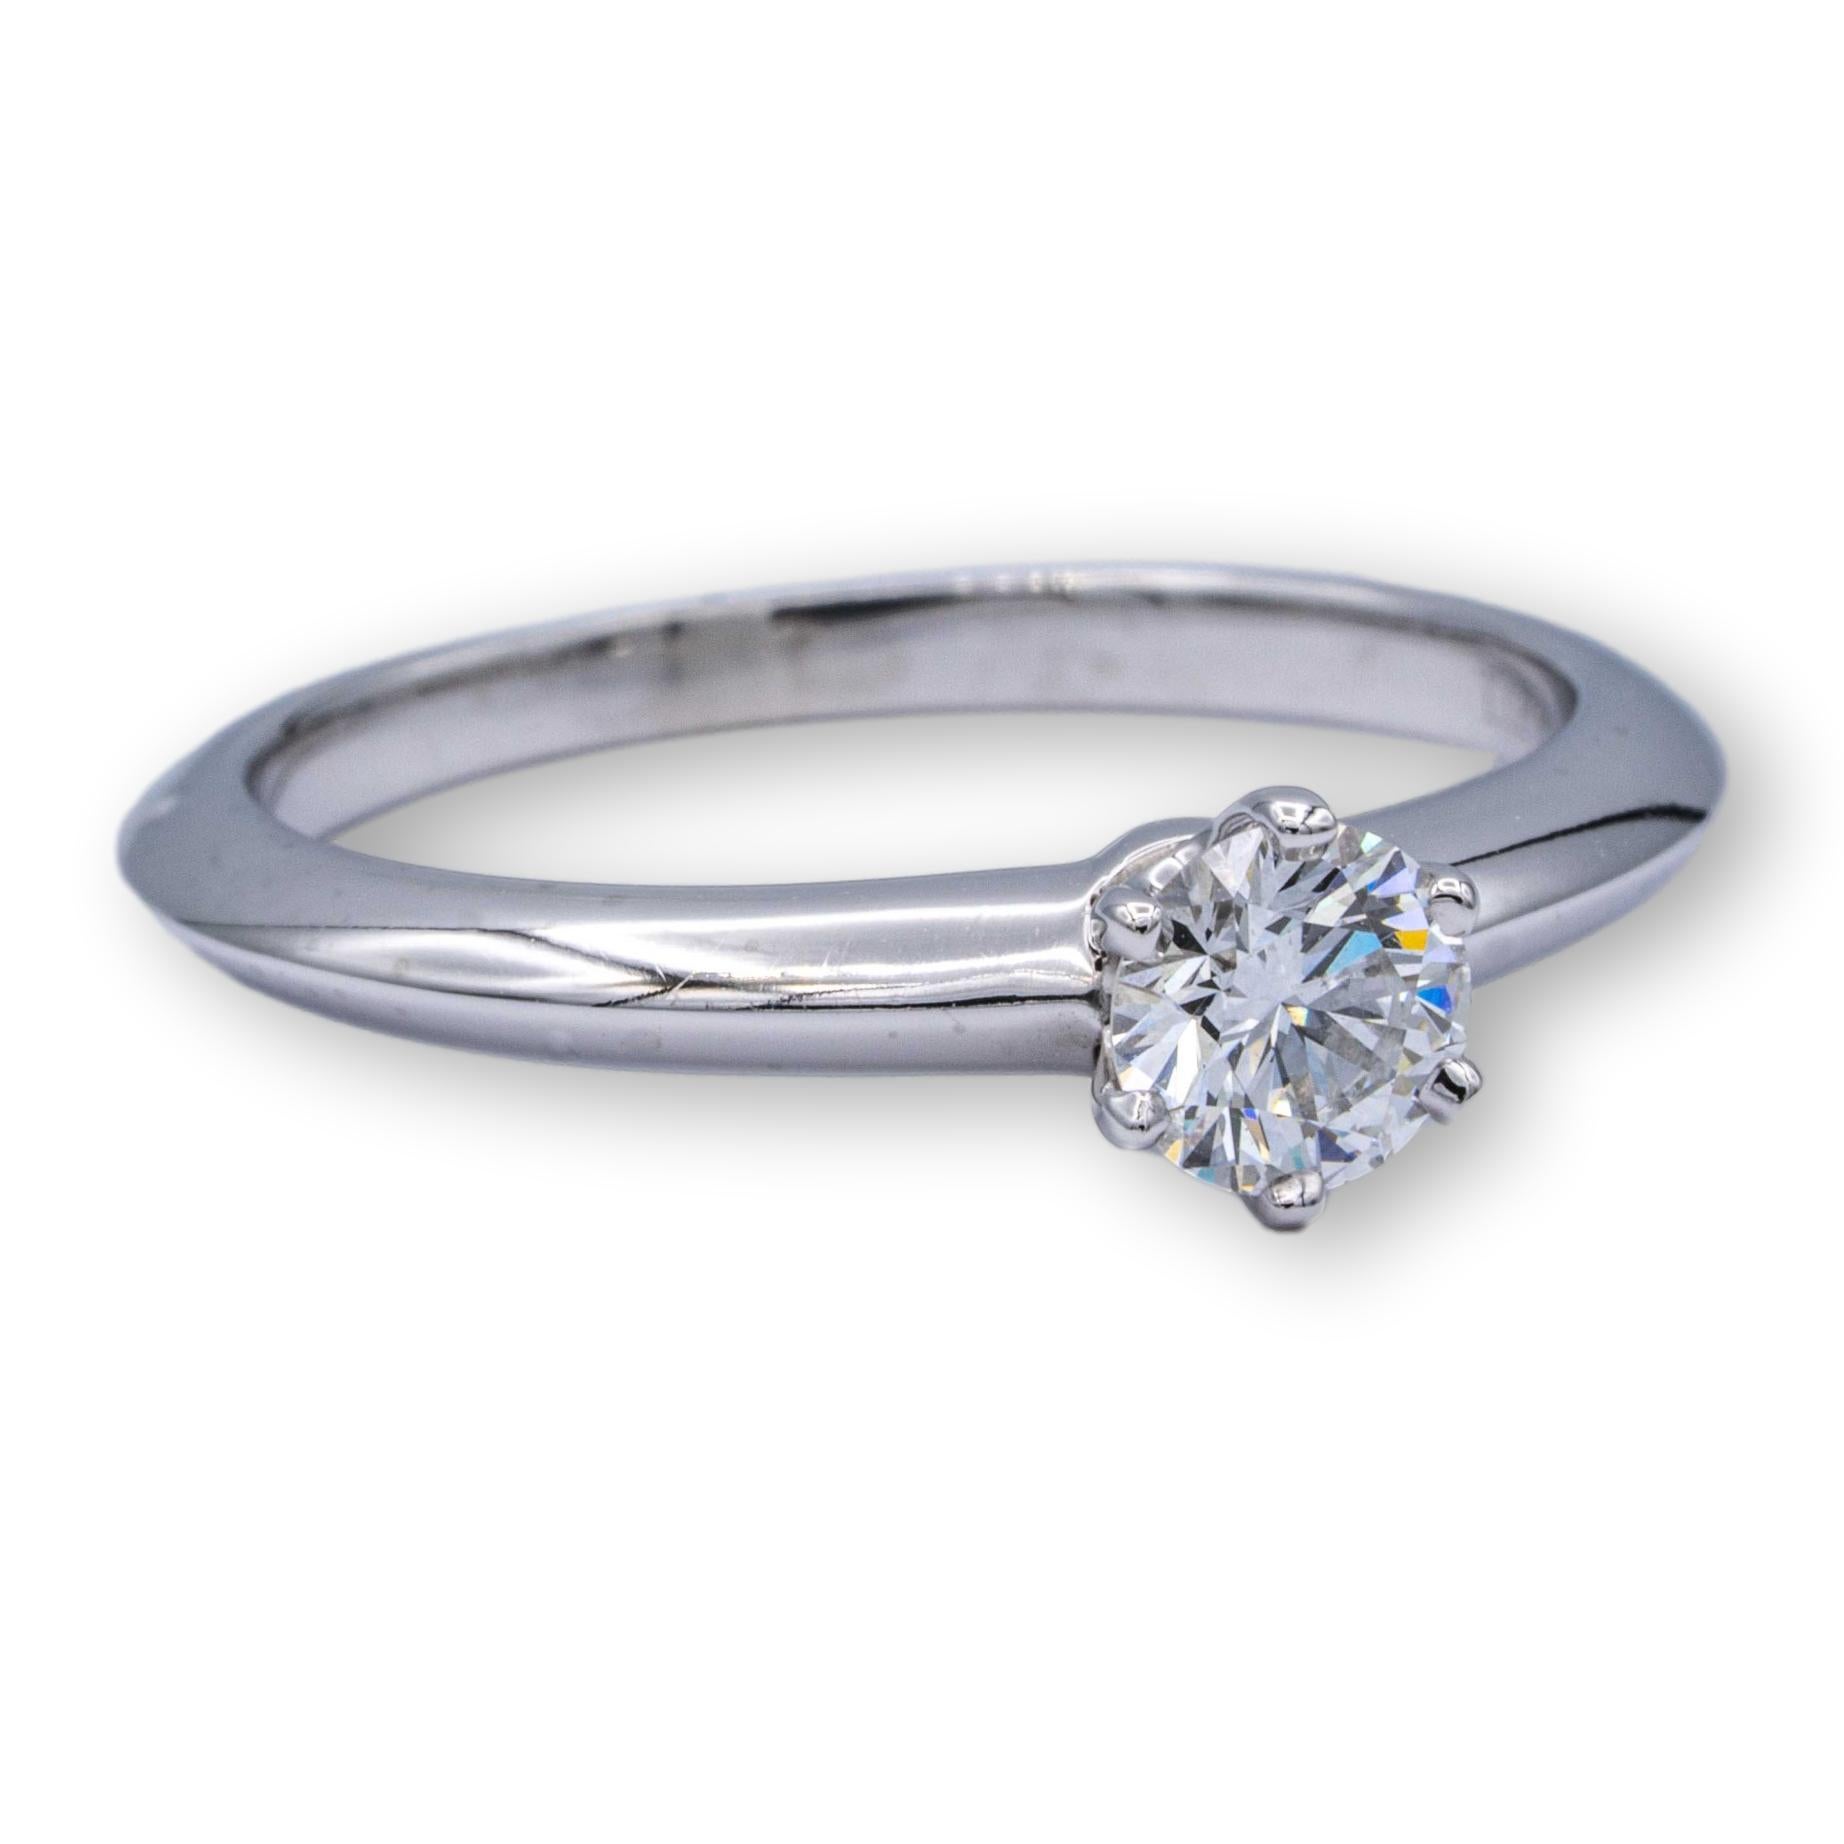 Tiffany & Co. Vintage solitaire engagement ring with a round brilliant cut diamond center weighing 0.30 carats F color VS1 clarity. Fully Hallmarked.

Ring Specifications:
Brand; Tiffany & co.
Hallmarks: Tiffany & Co. 17570374 .30 CT
Finger Size: